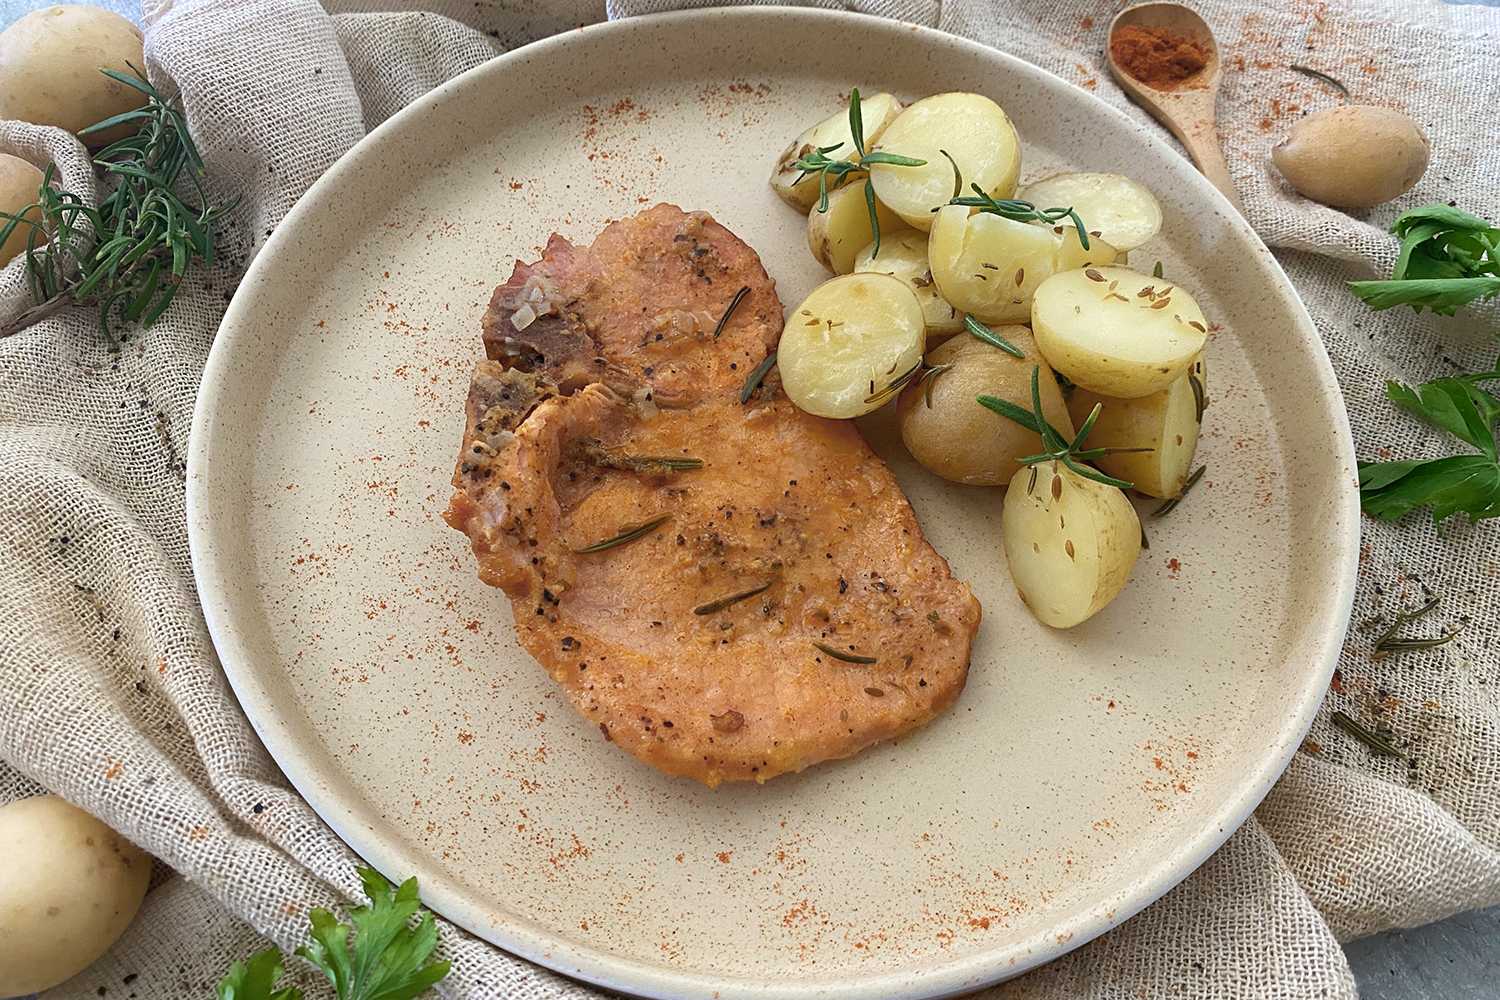 Pork Chop with roasted potatoes on side topped with rosemary and paprika 